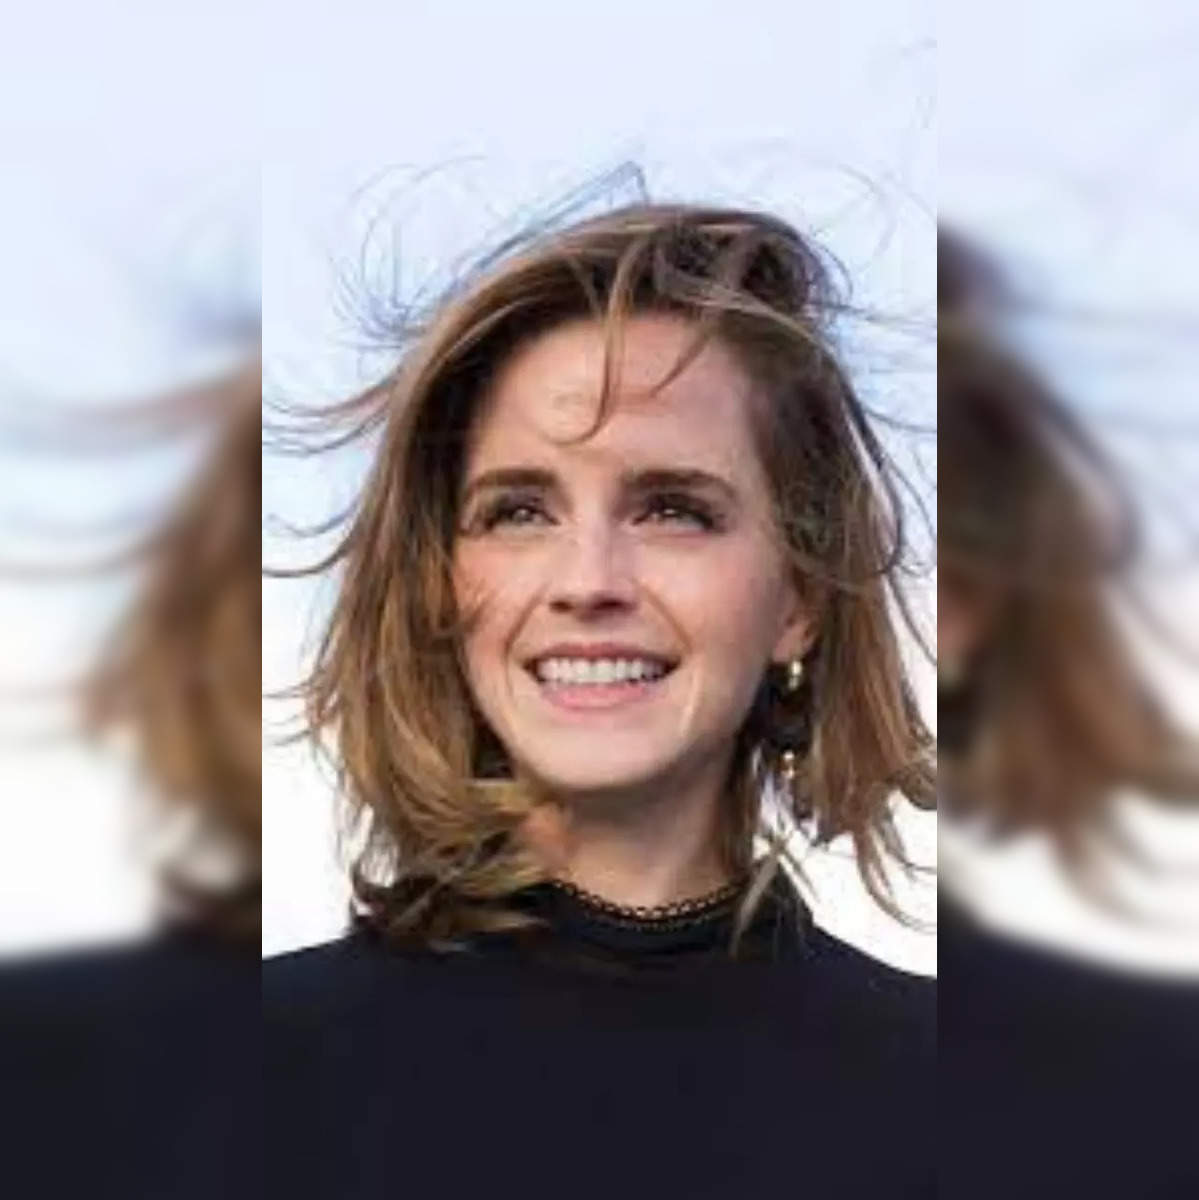 emma watson: Emma Watson Birthday: 15 things to know about Hermione Granger  from Harry Potter series - The Economic Times